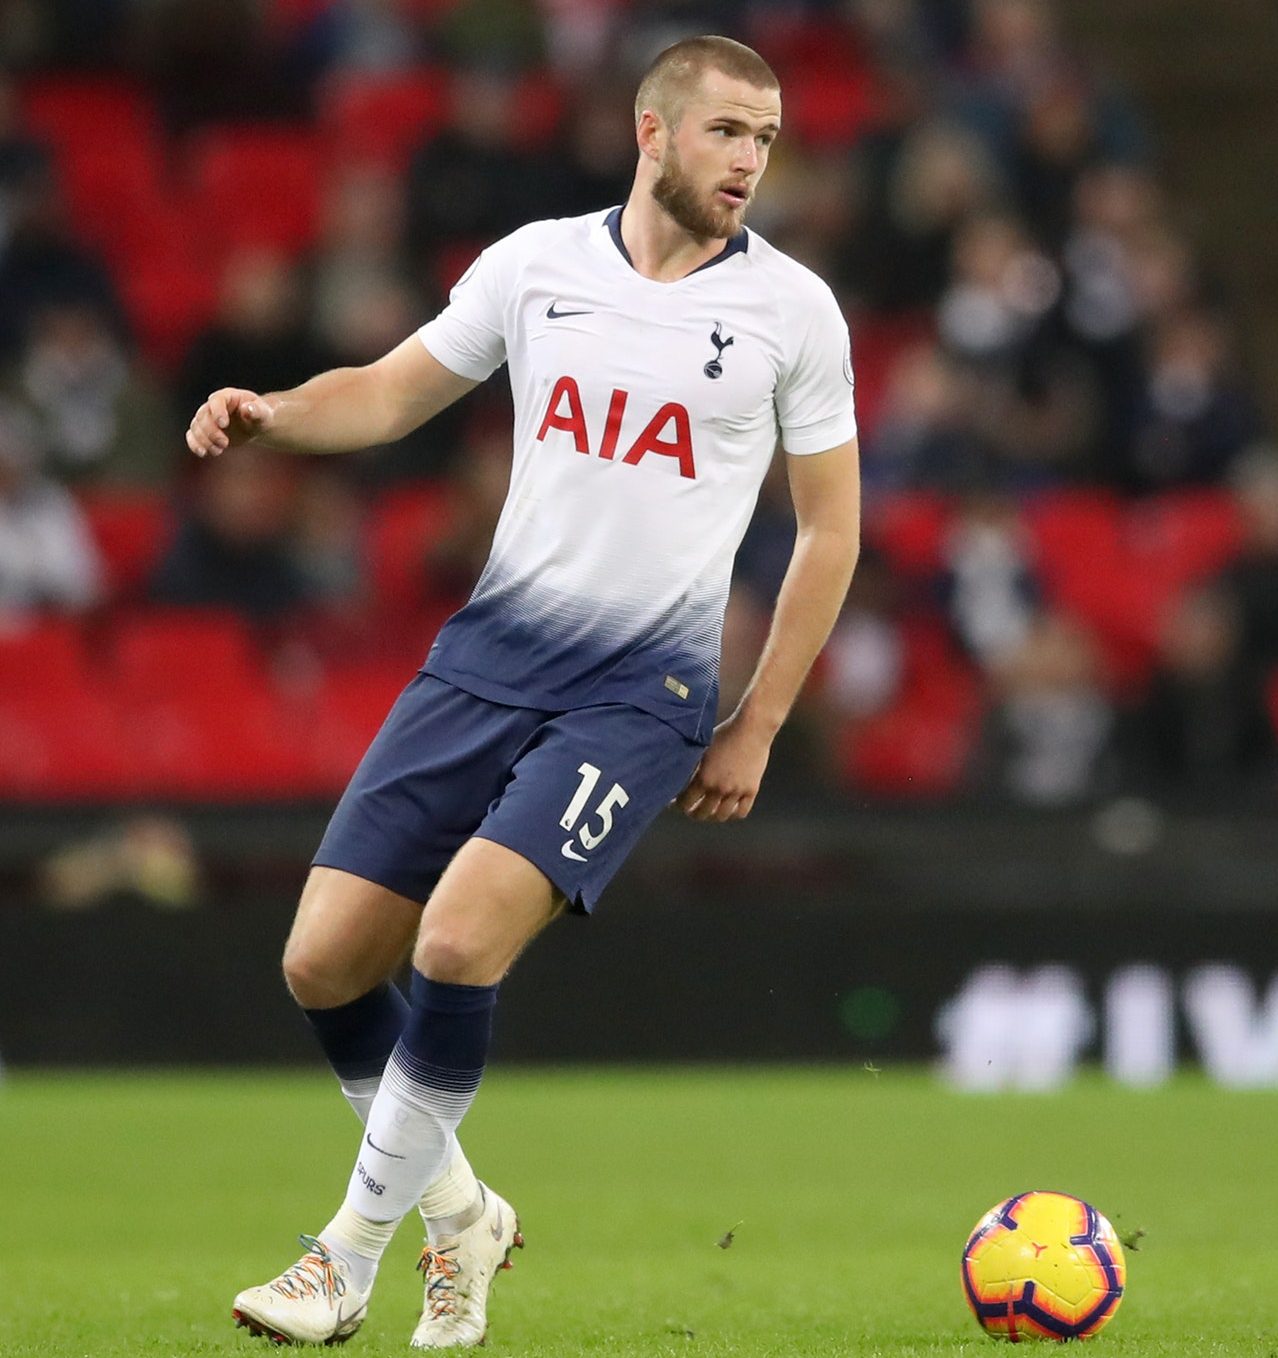 Dier Hoping “Difficult” Period Behind Him